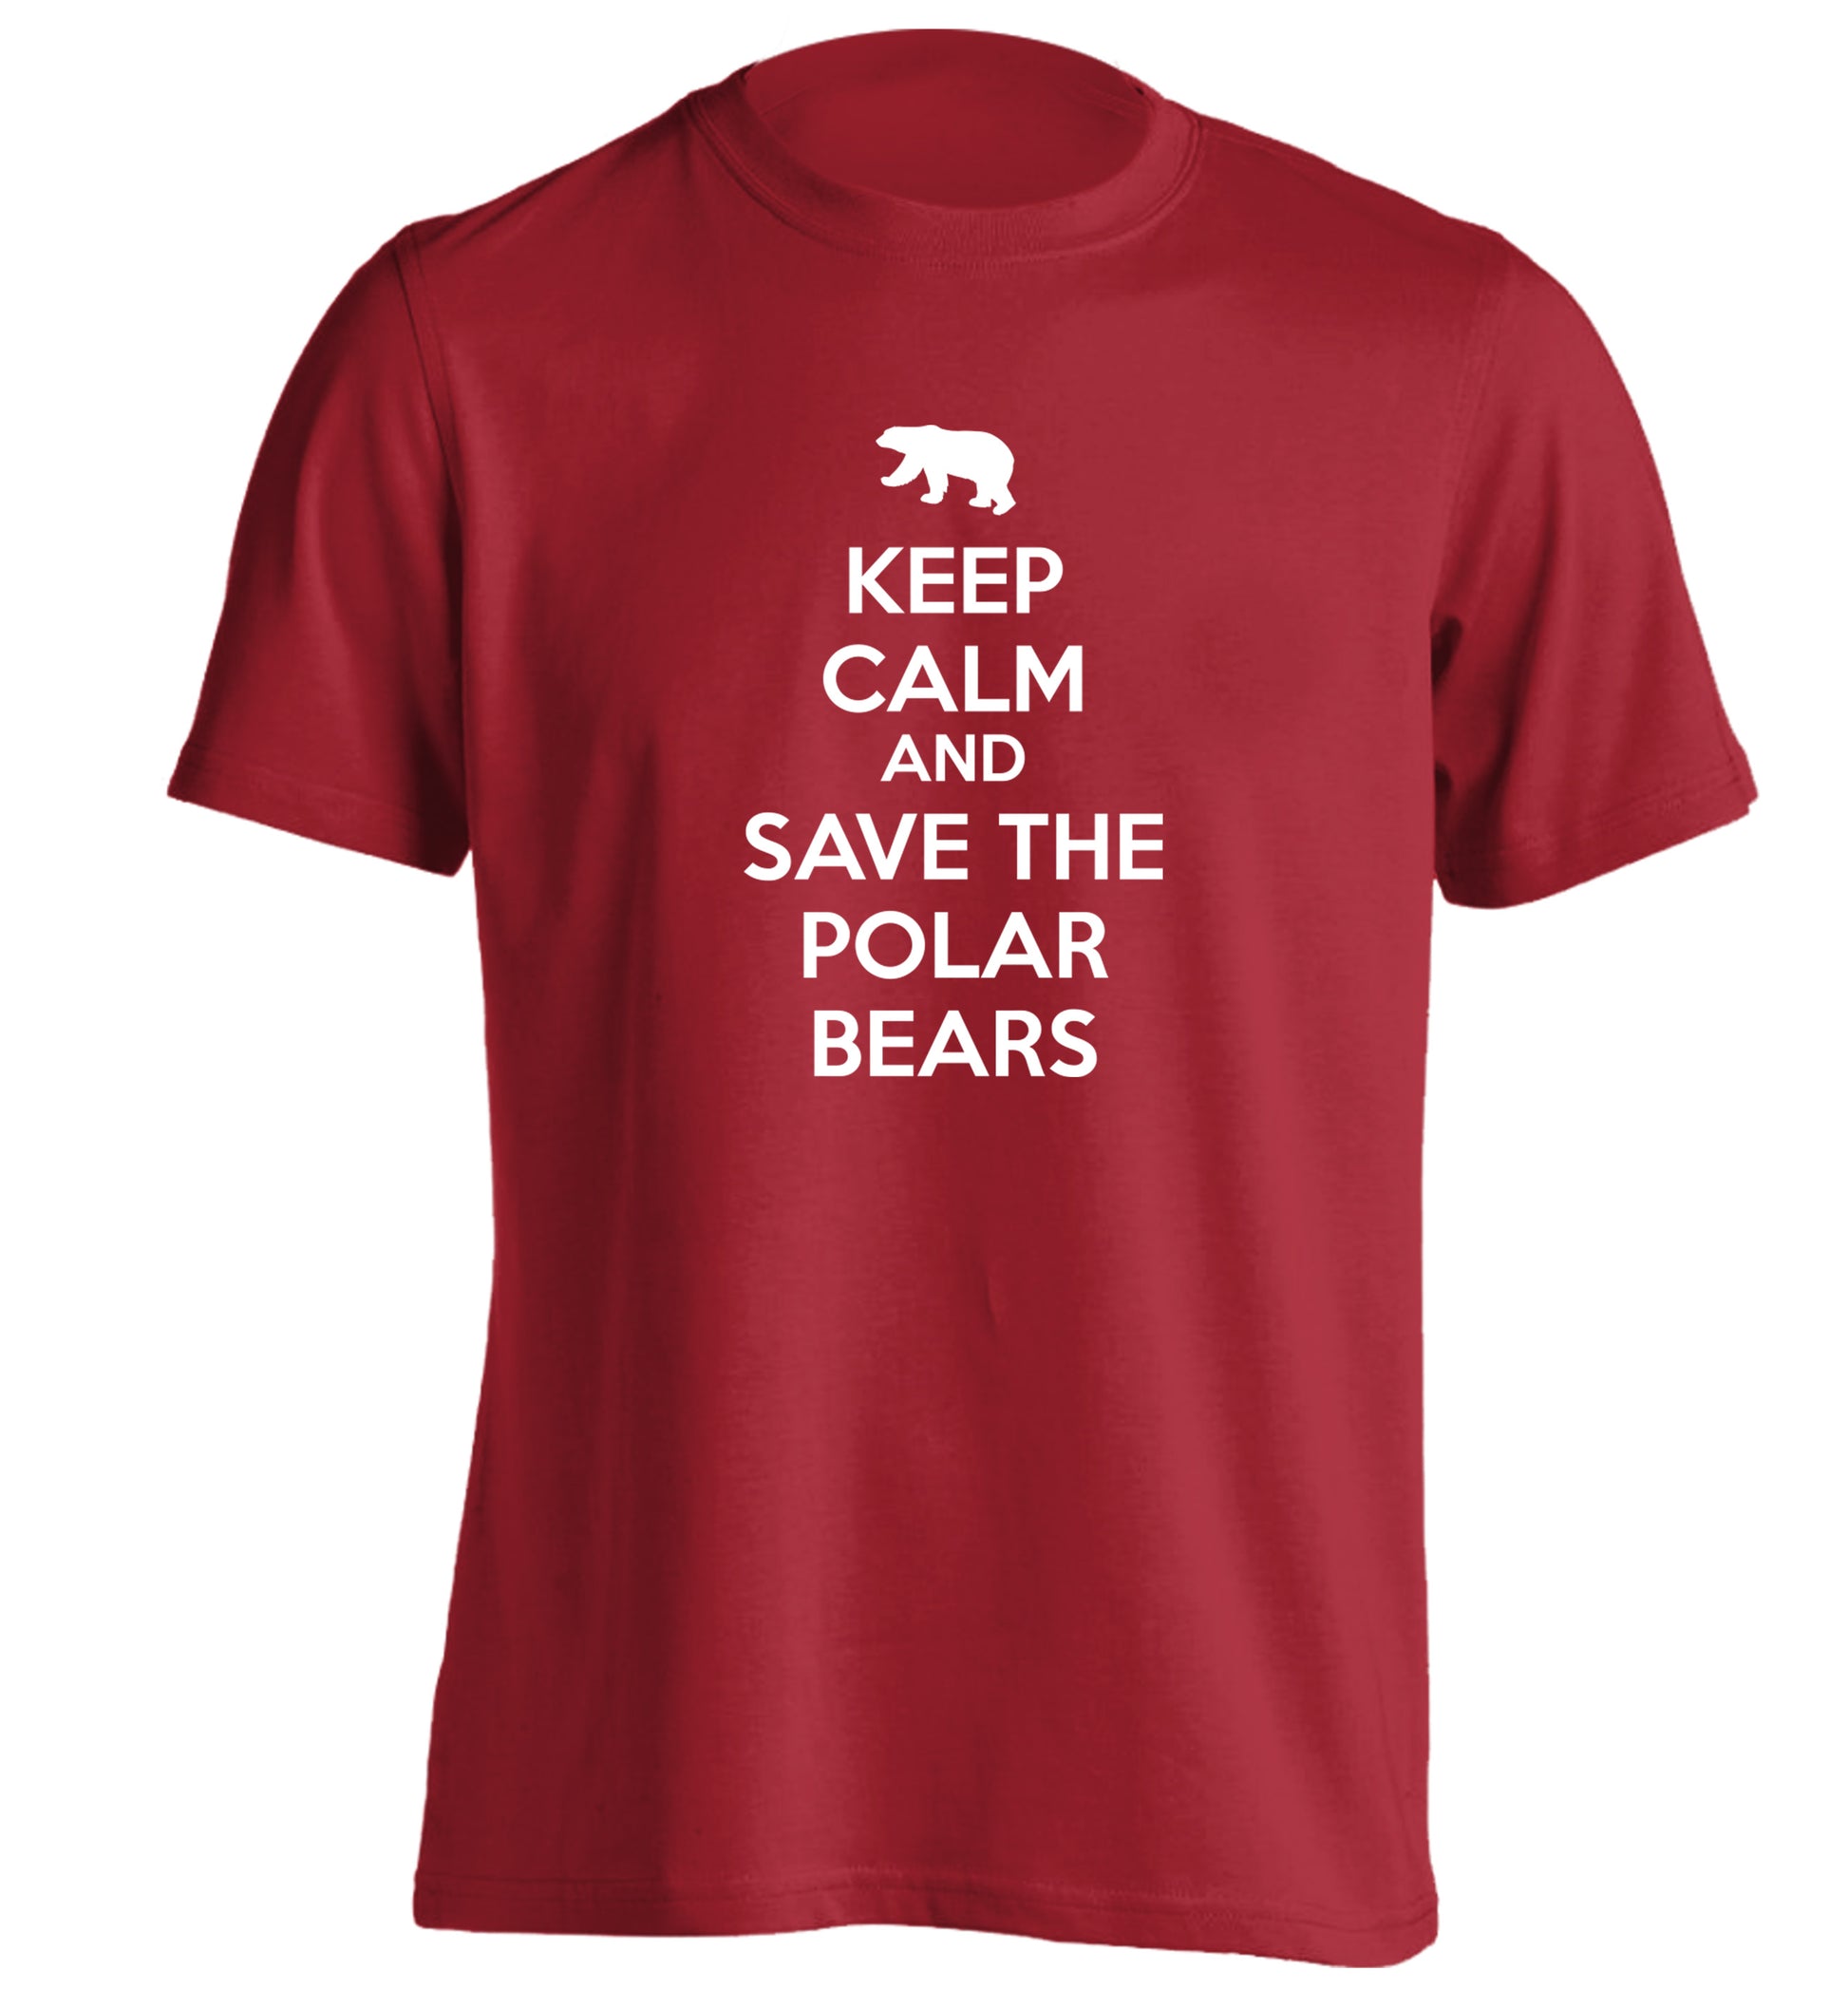 Keep calm and save the polar bears adults unisex red Tshirt 2XL